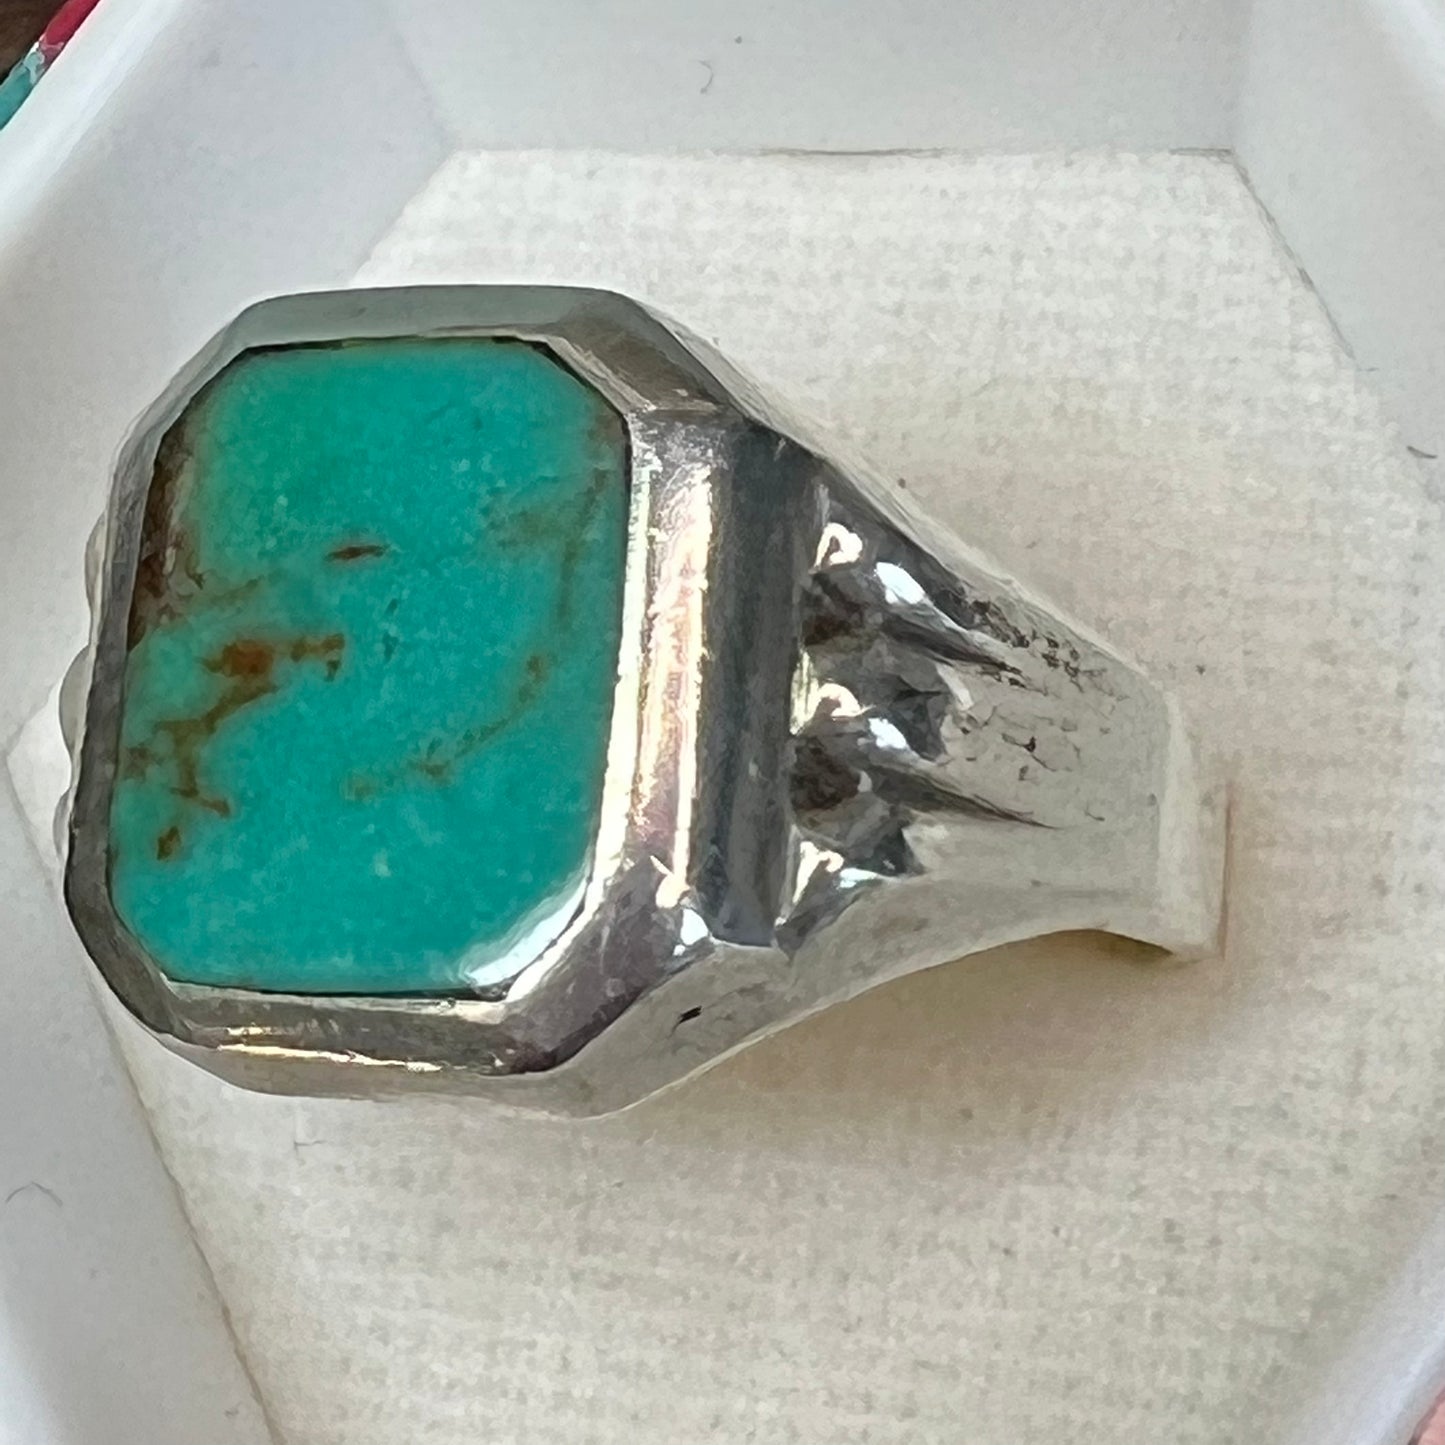 Vintage Mexican Sterling Silver & Turquoise Semi Precious Gemstone Signet Ring Size 11.5